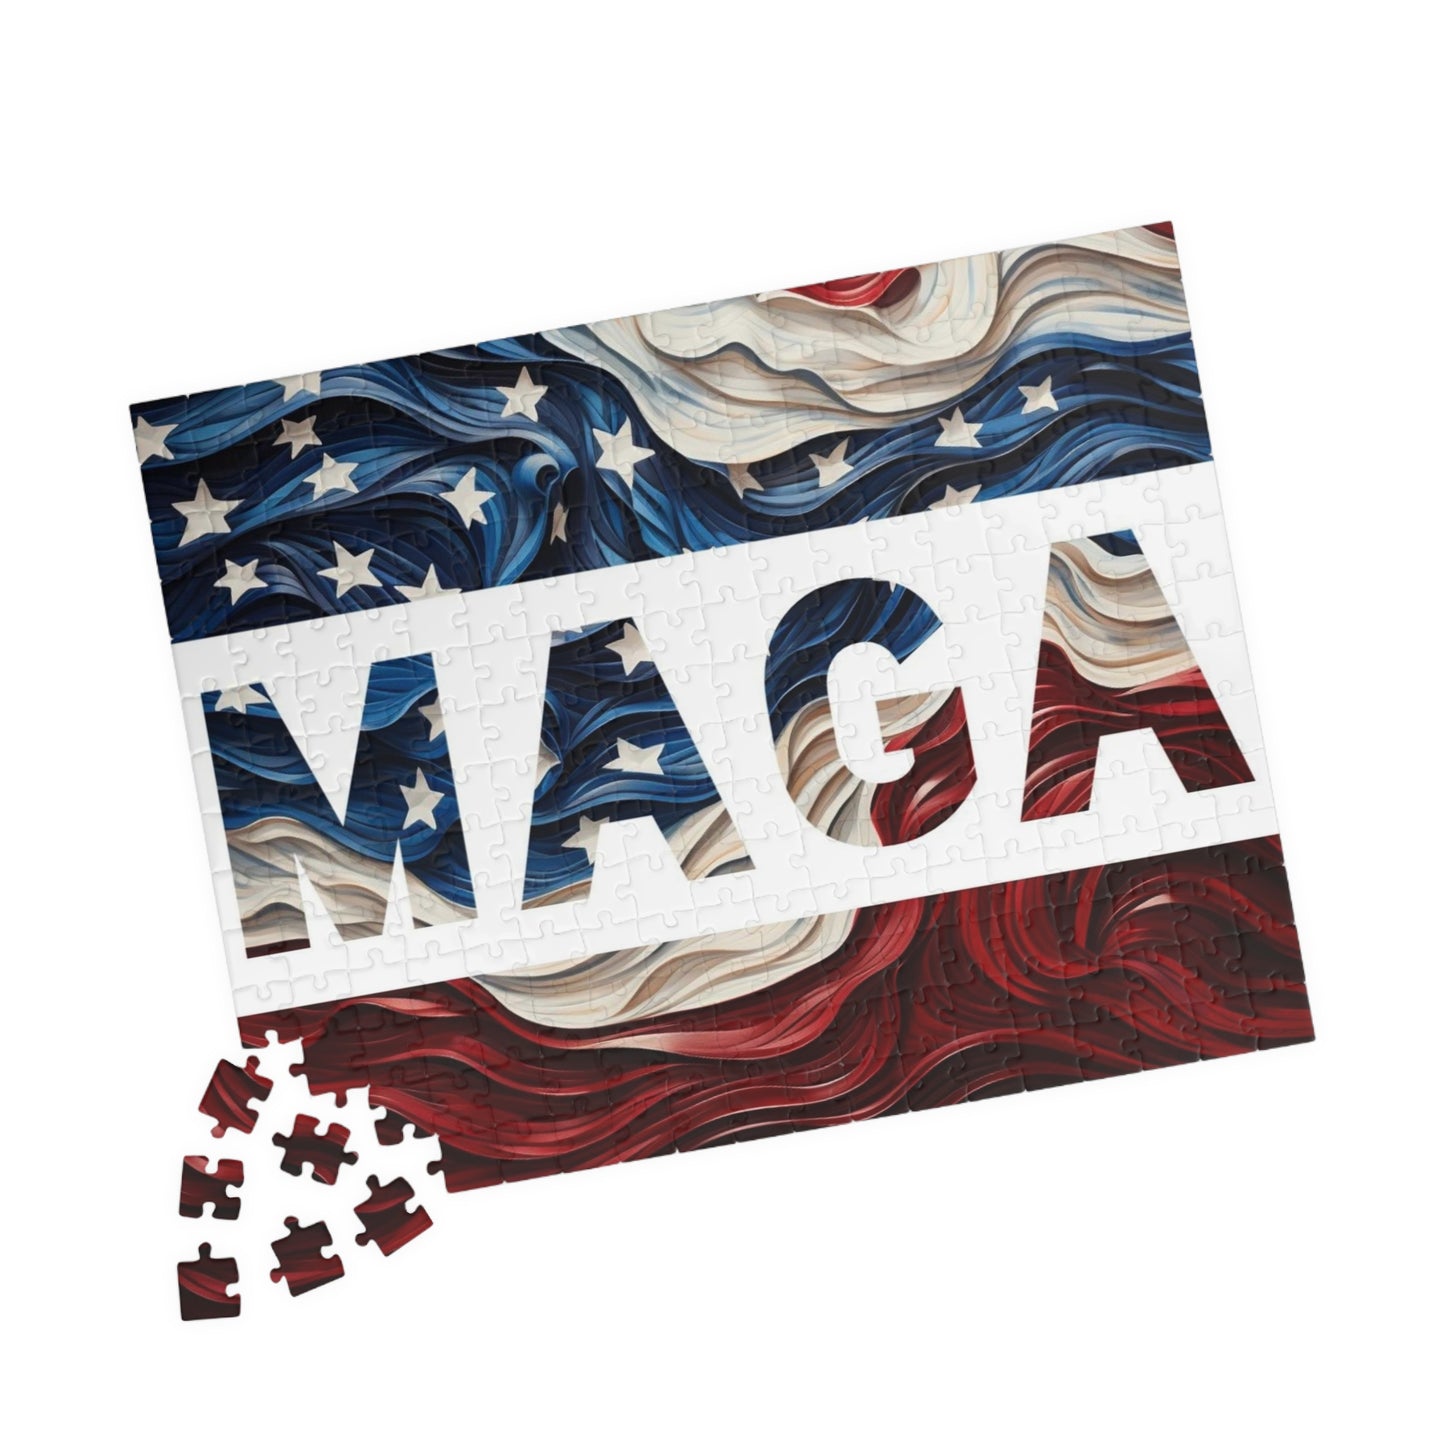 MAGA Red, White and Blue Trump Wood Puzzle 252 or 520 piece